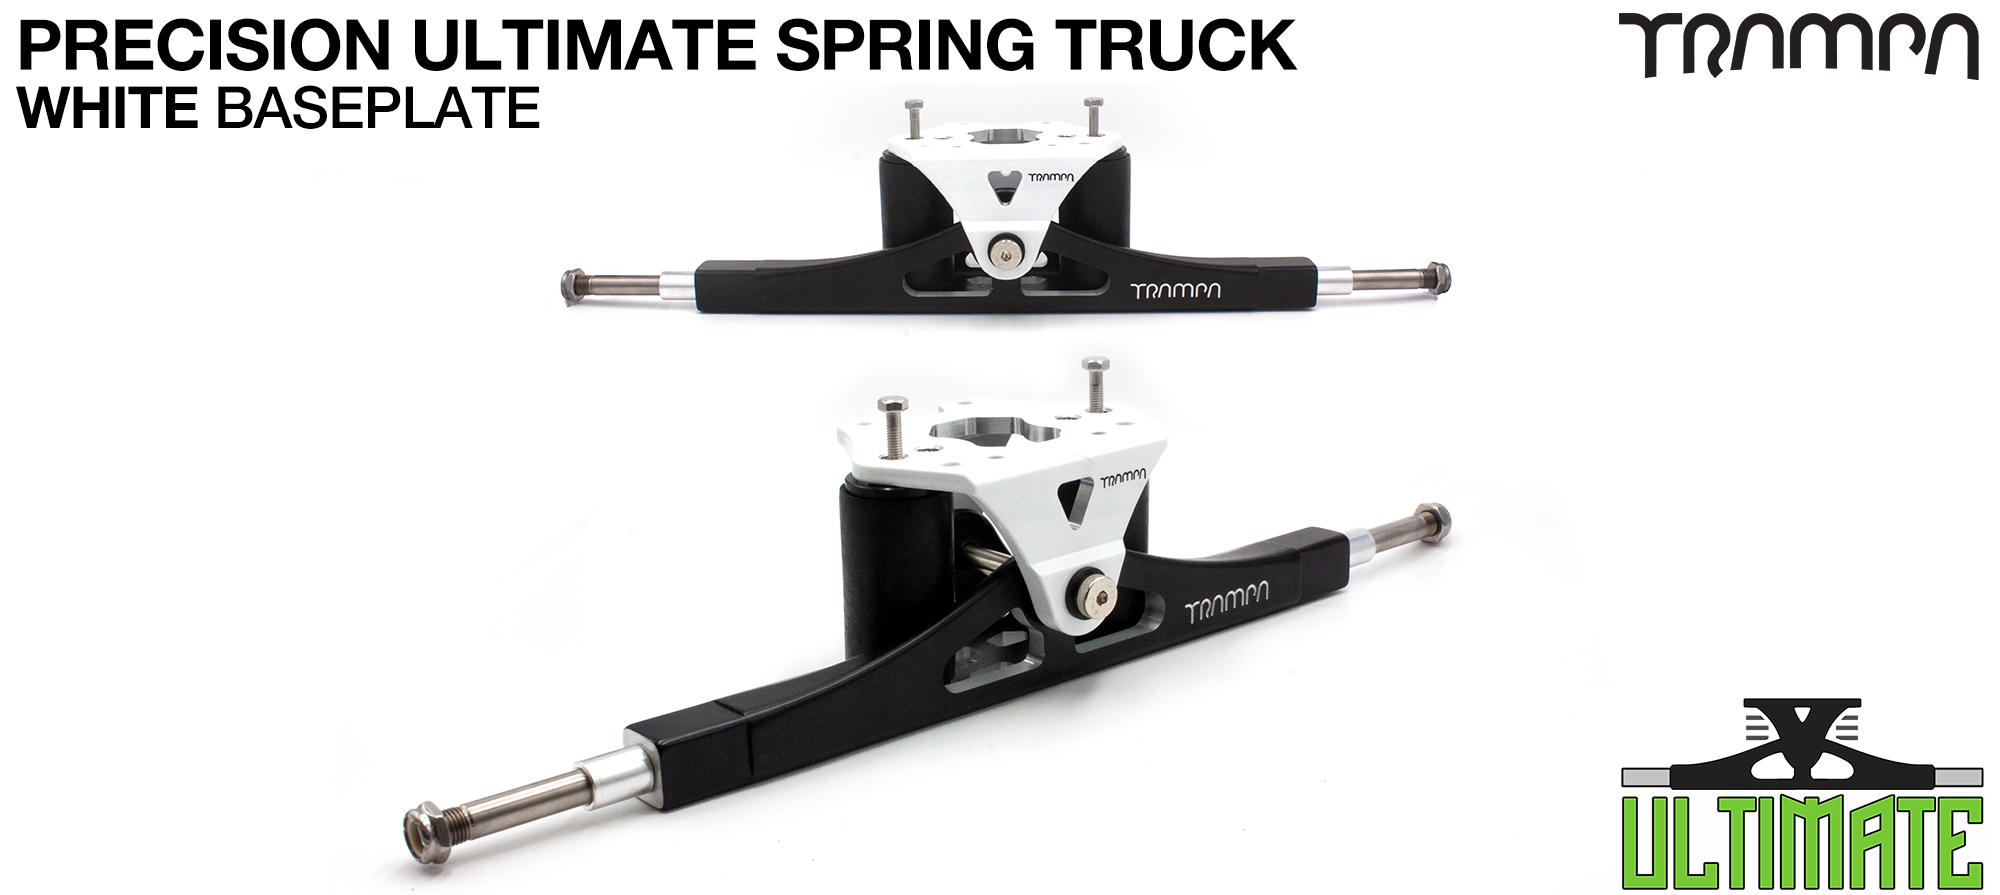 Precision CNC ULTIMATE ATB TRUCK with CNC Motor Mount fixing points, WHITE Baseplate, TITANIUM Axles & Kingpin